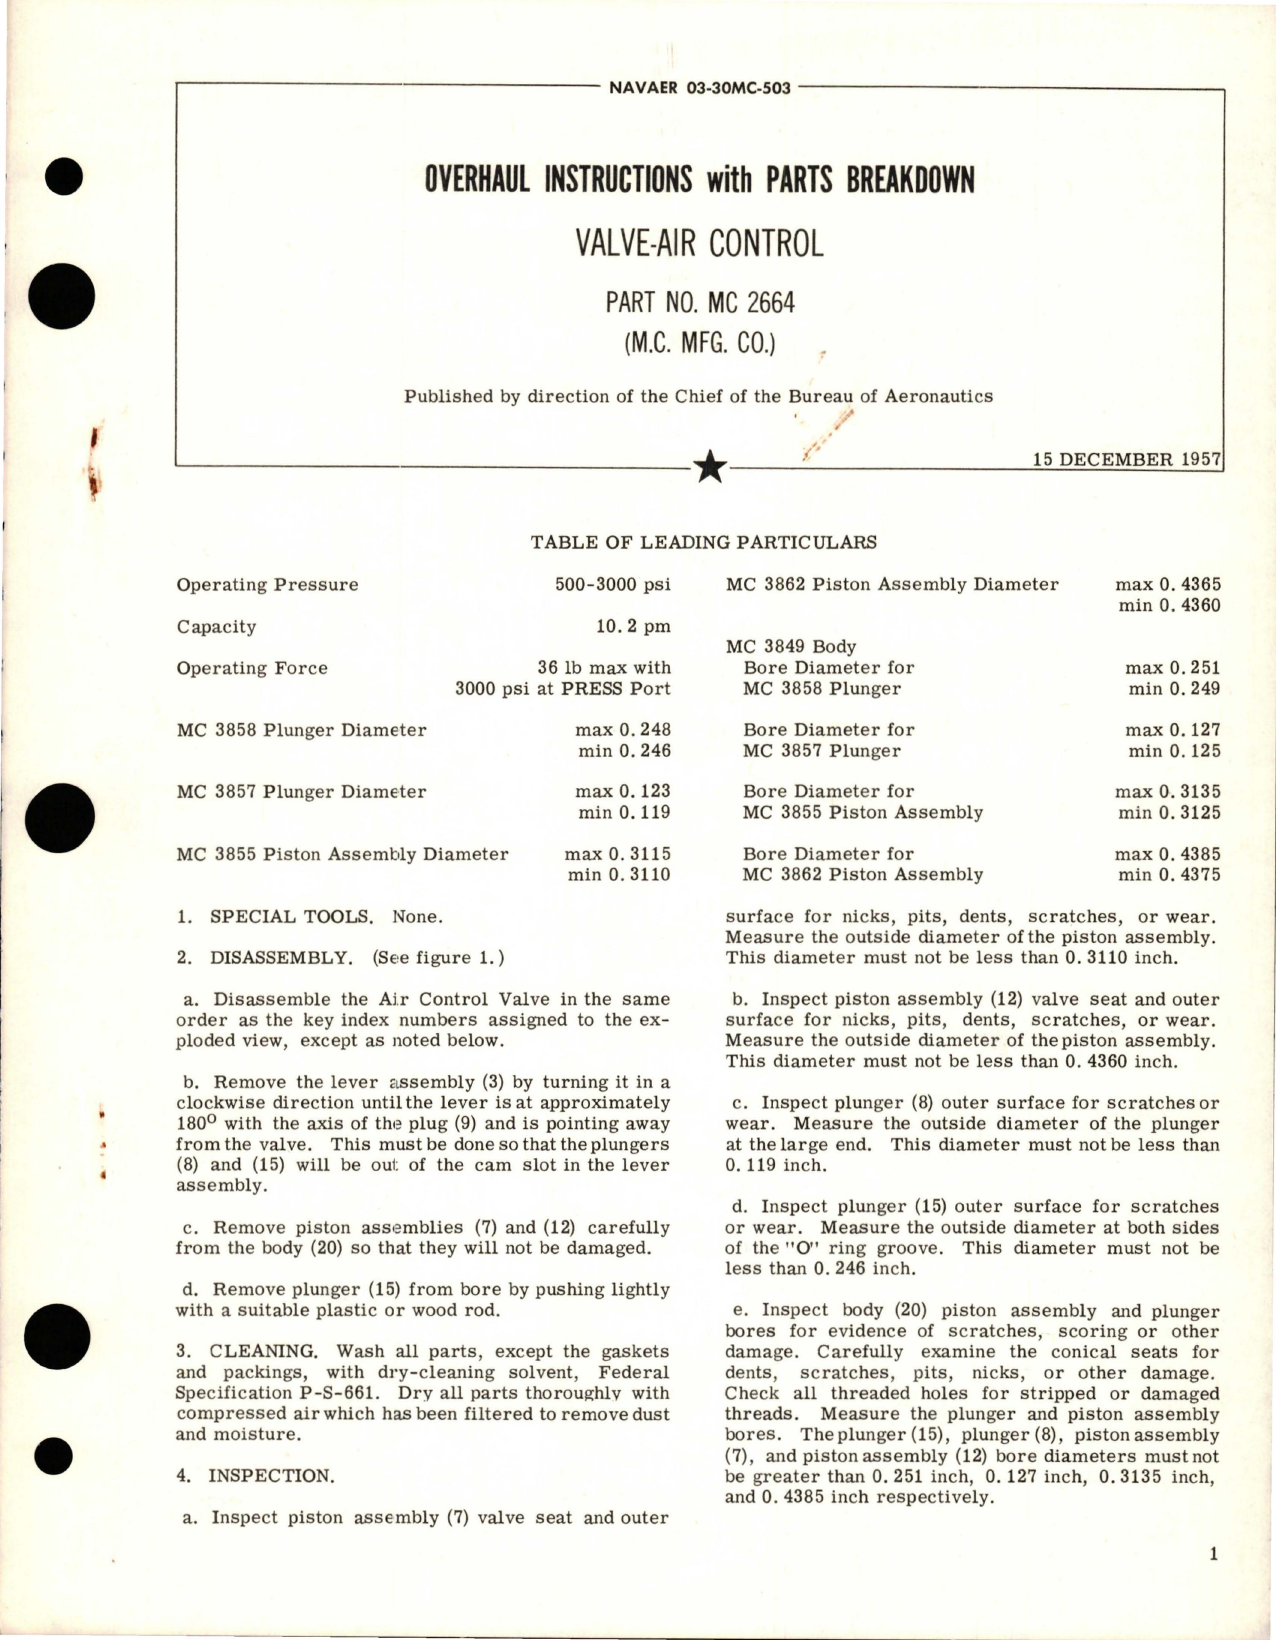 Sample page 1 from AirCorps Library document: Overhaul Instructions with Parts Breakdown for Air Control Valve - Part MC 2664